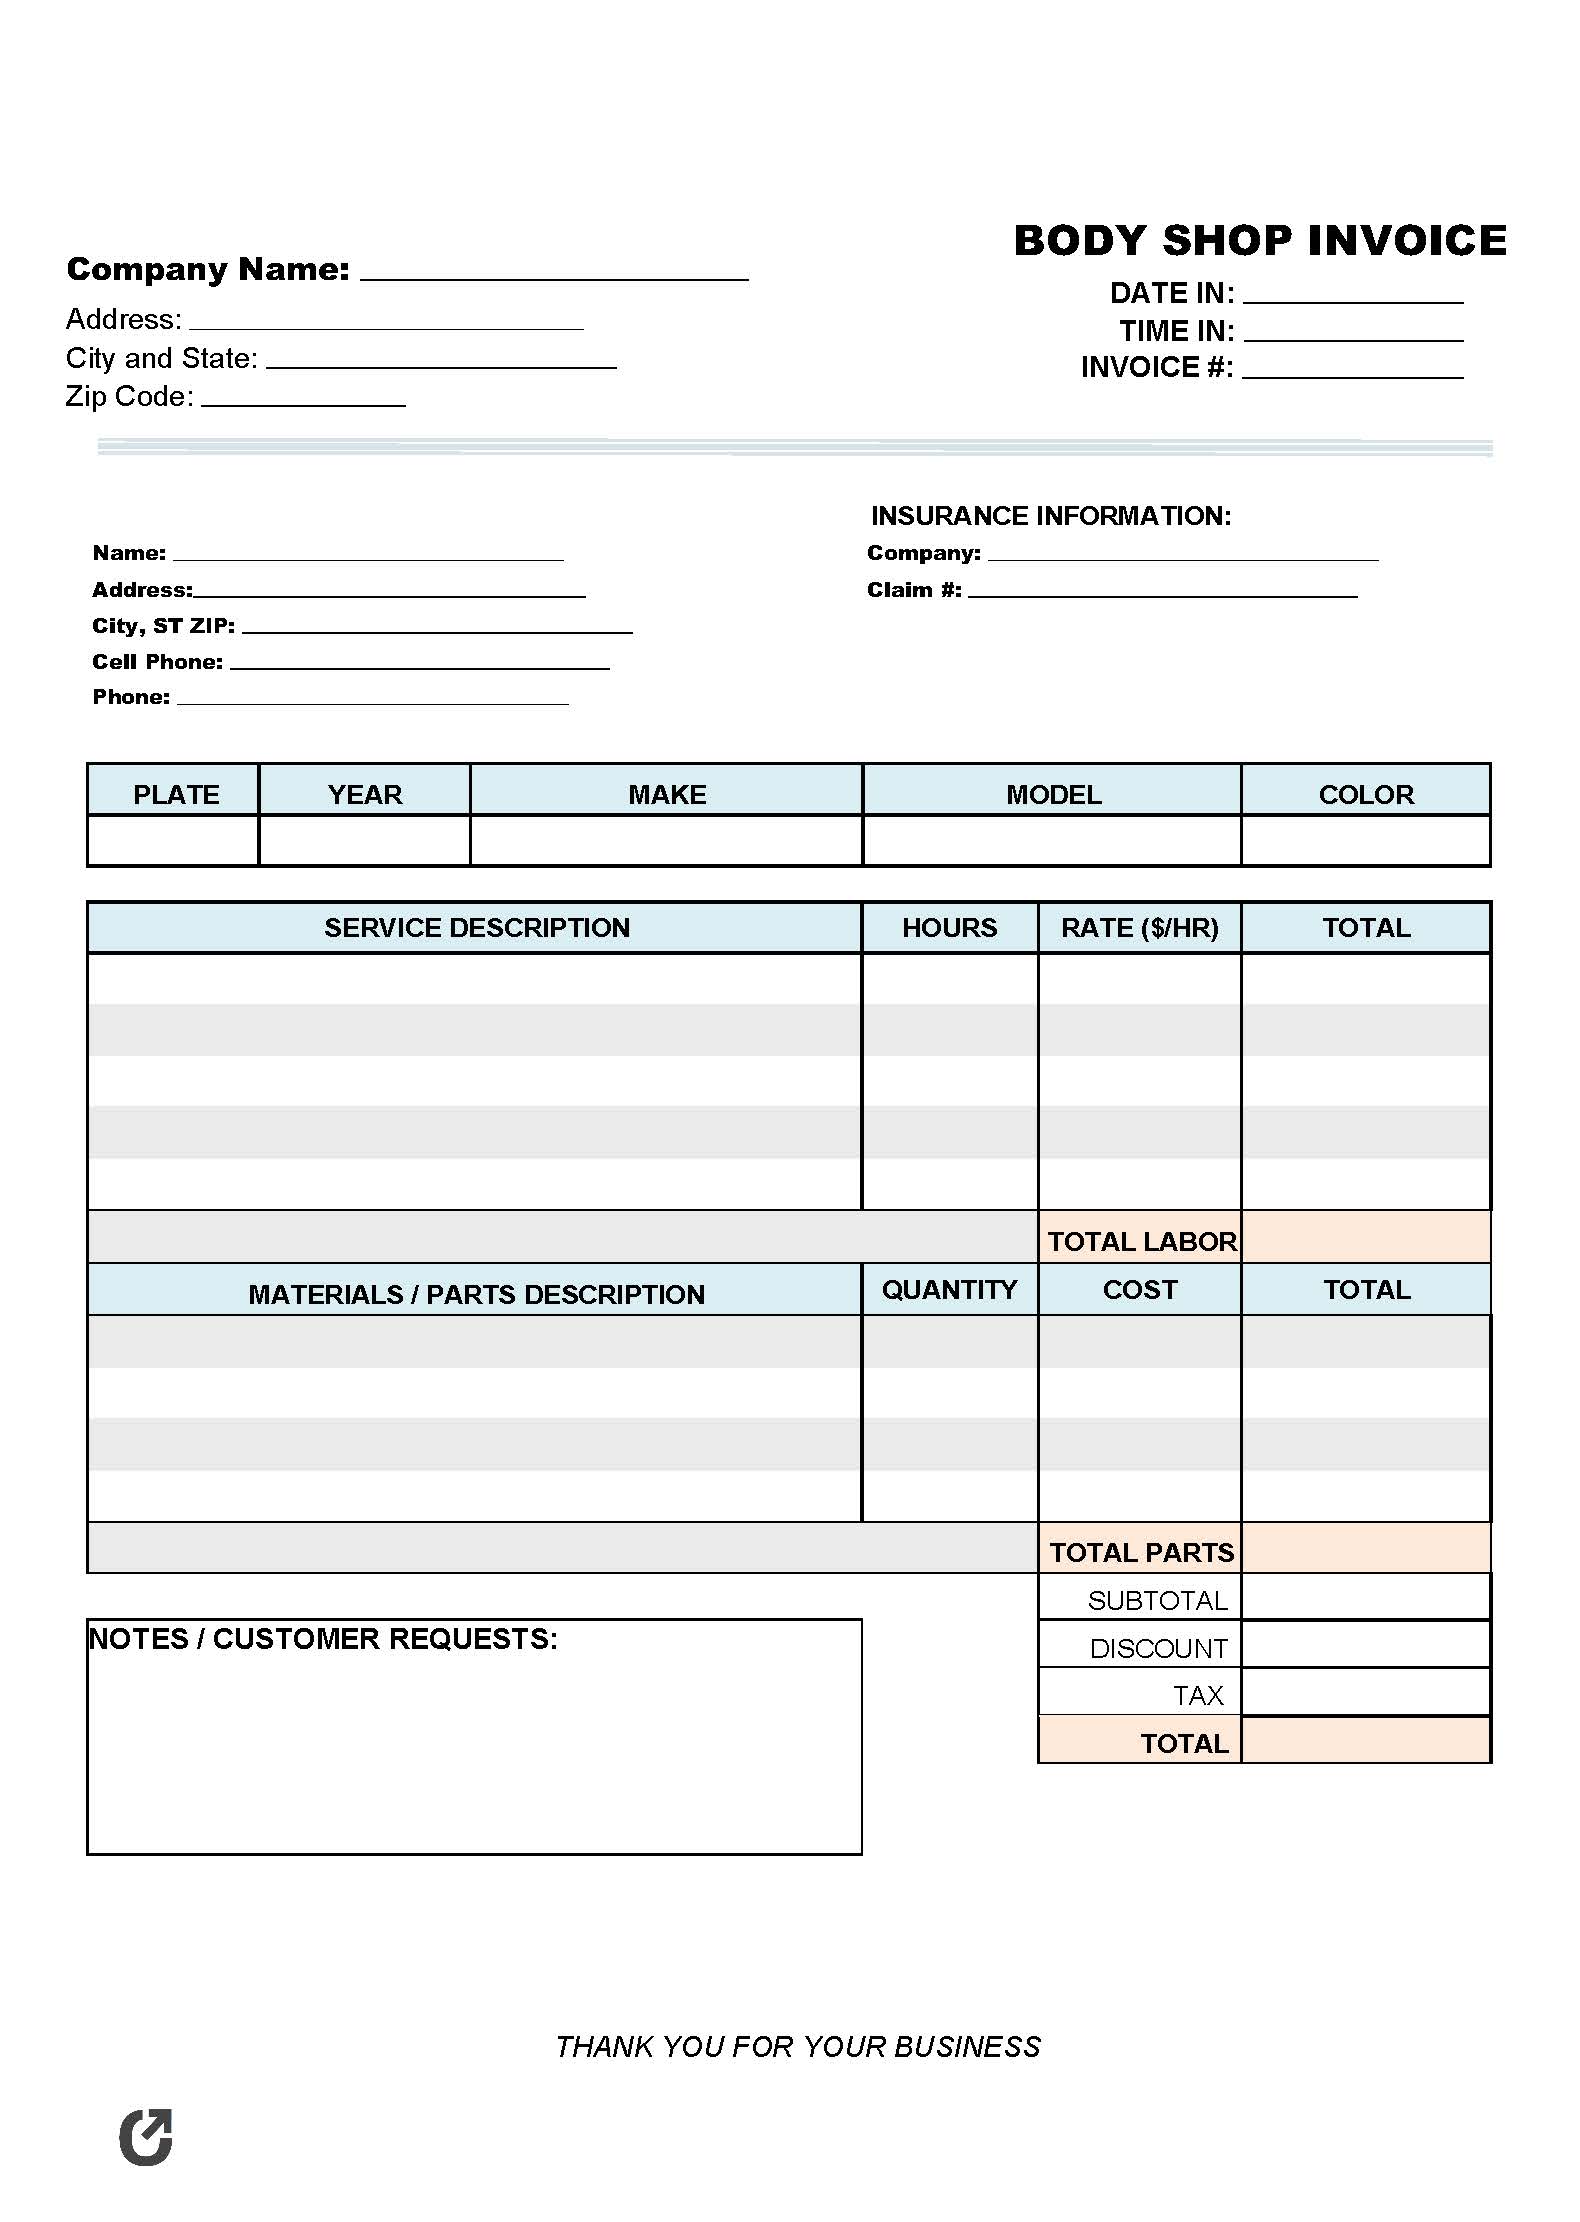 Free Body Shop Invoice Template  PDF  WORD  EXCEL With Regard To Mechanic Shop Invoice Templates